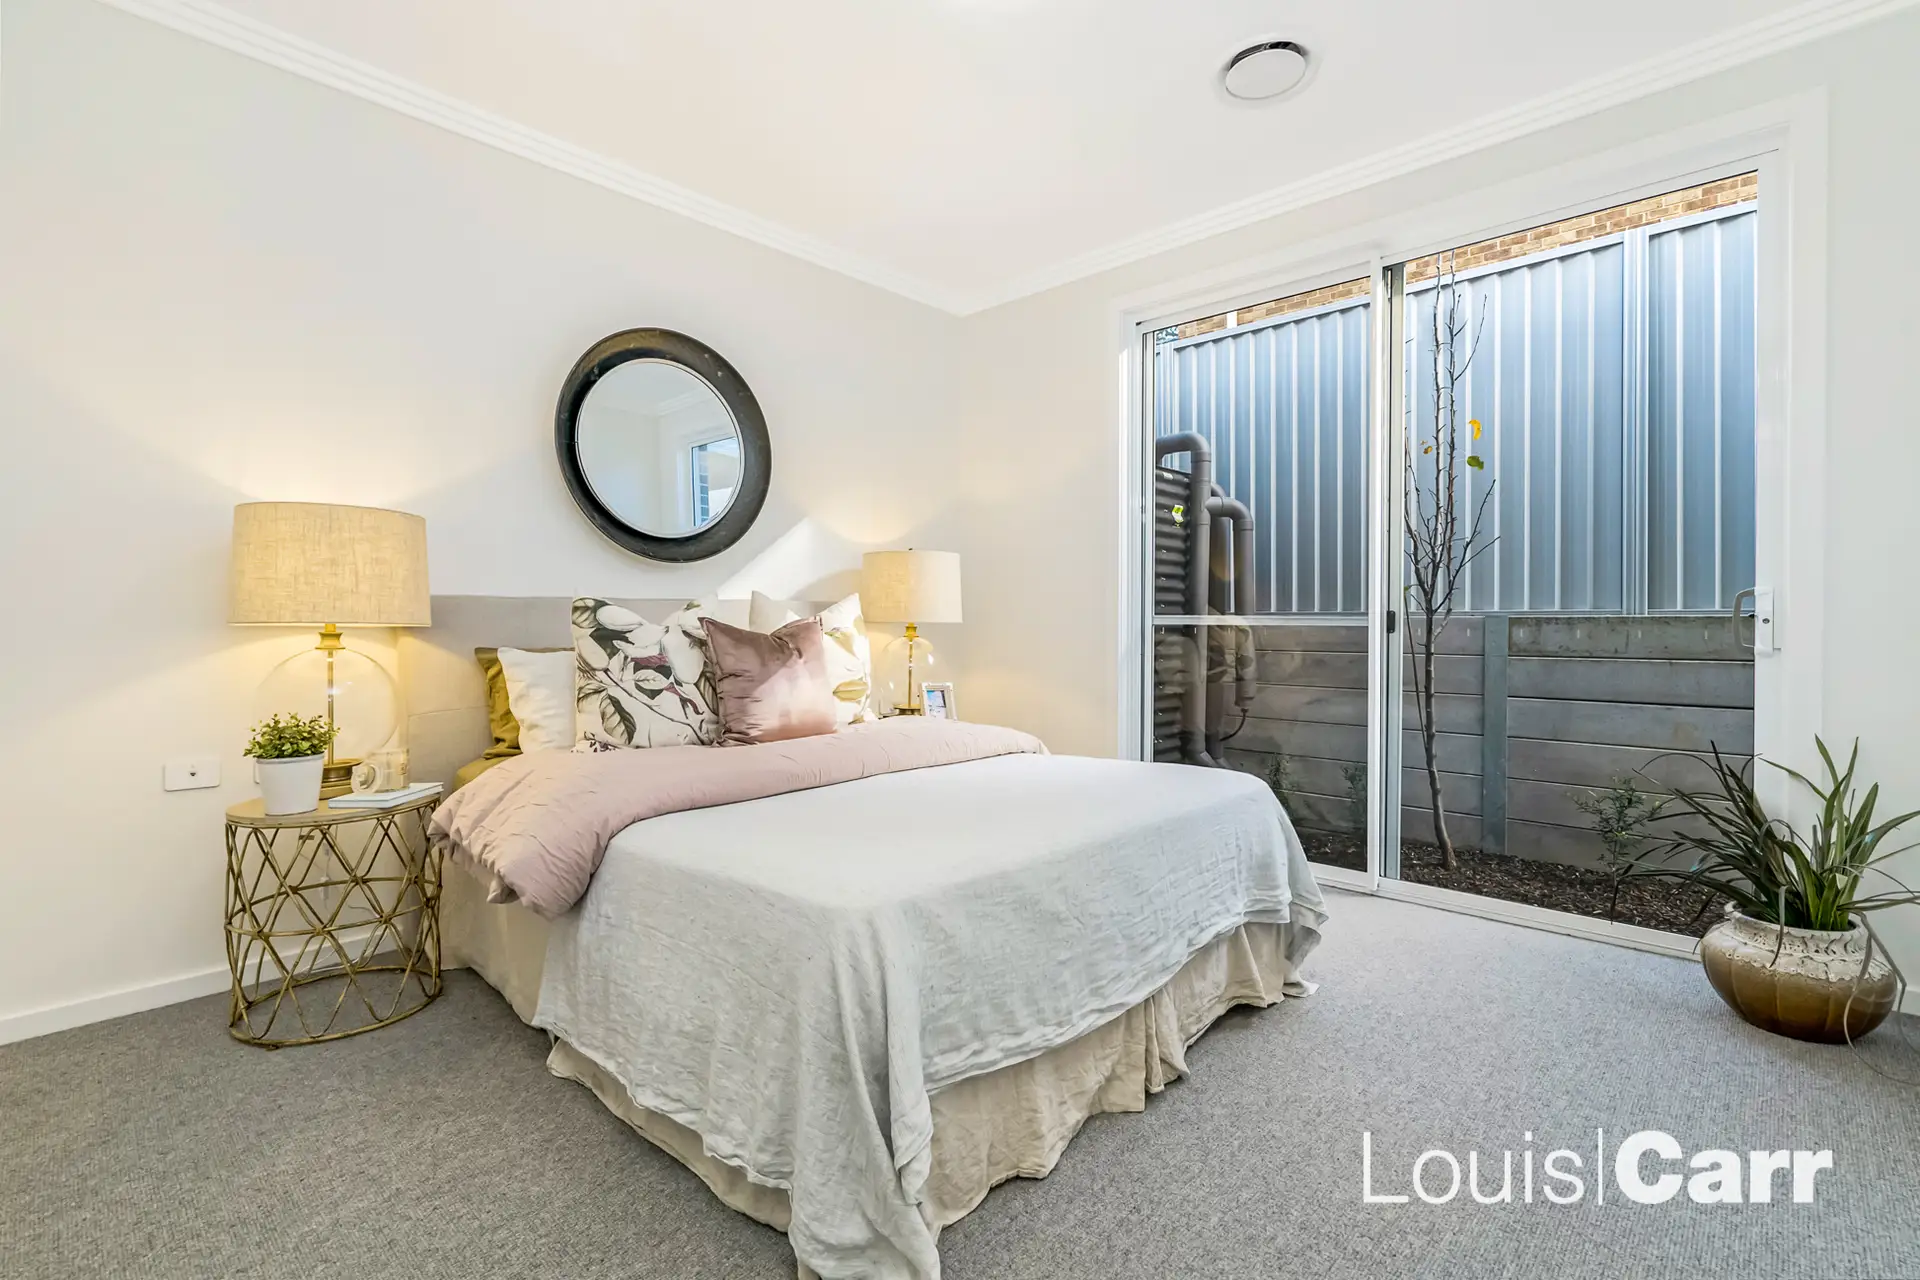 Photo #6: 2/18-20 Cardinal Avenue, Beecroft - Sold by Louis Carr Real Estate